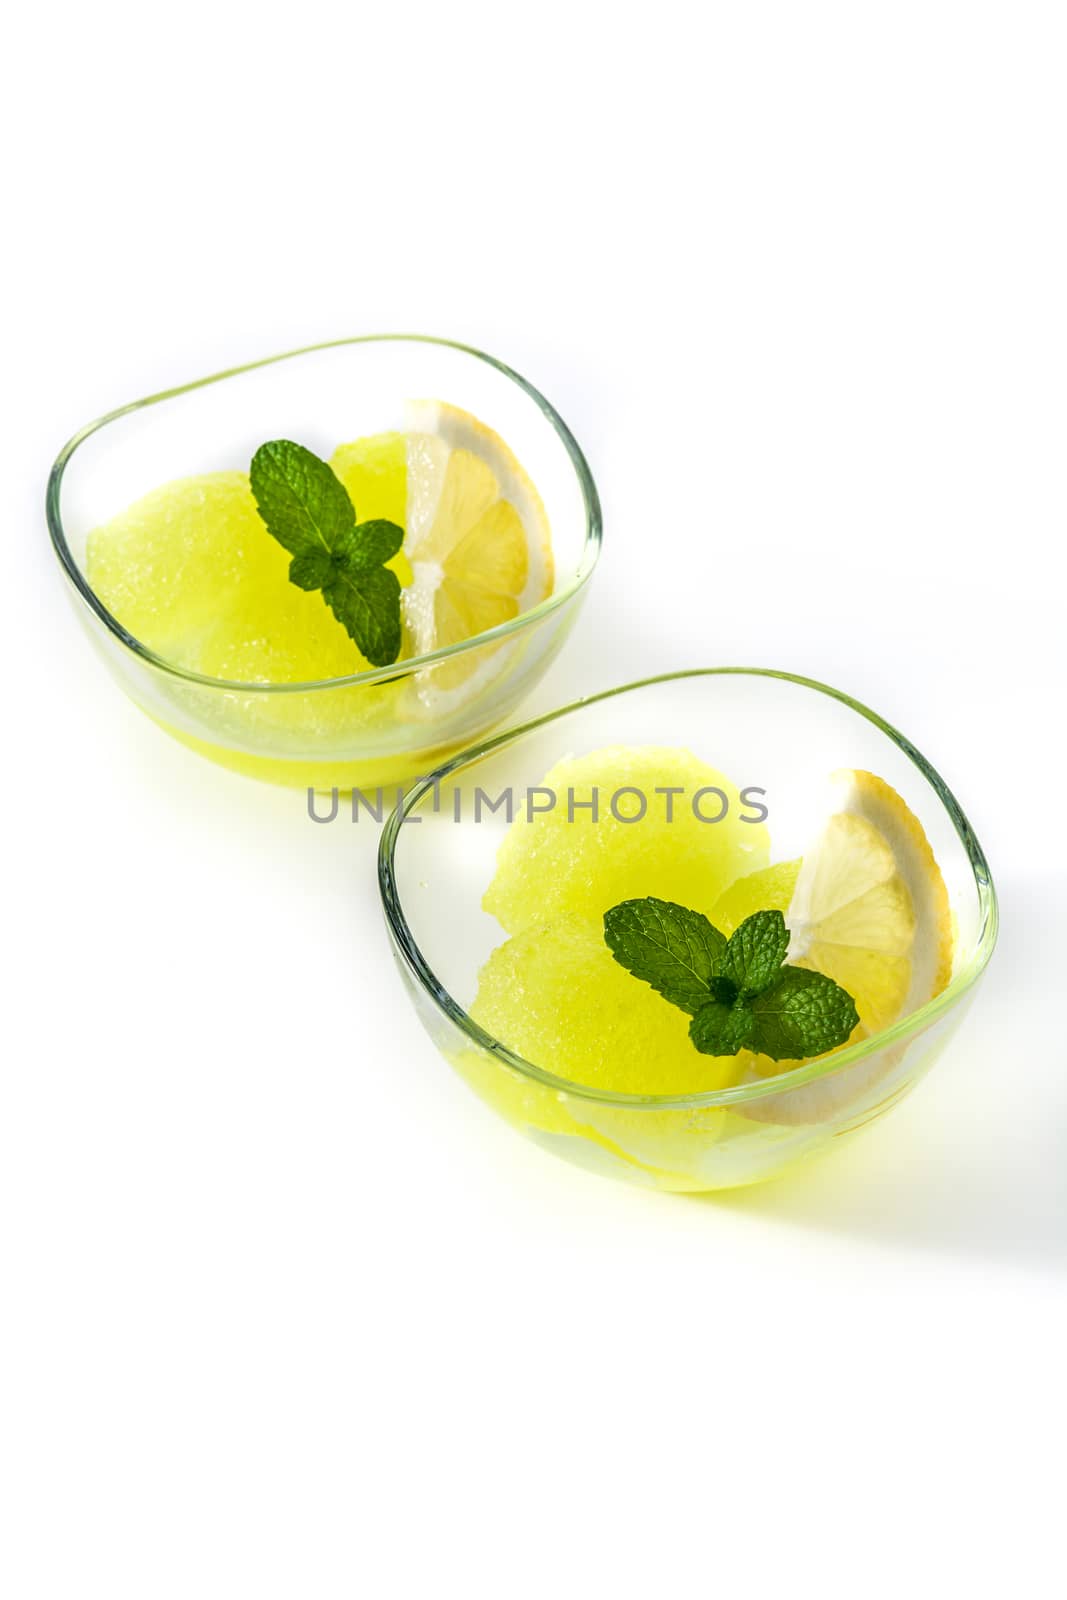 Lemon sorbet with mint in glasses  by chandlervid85